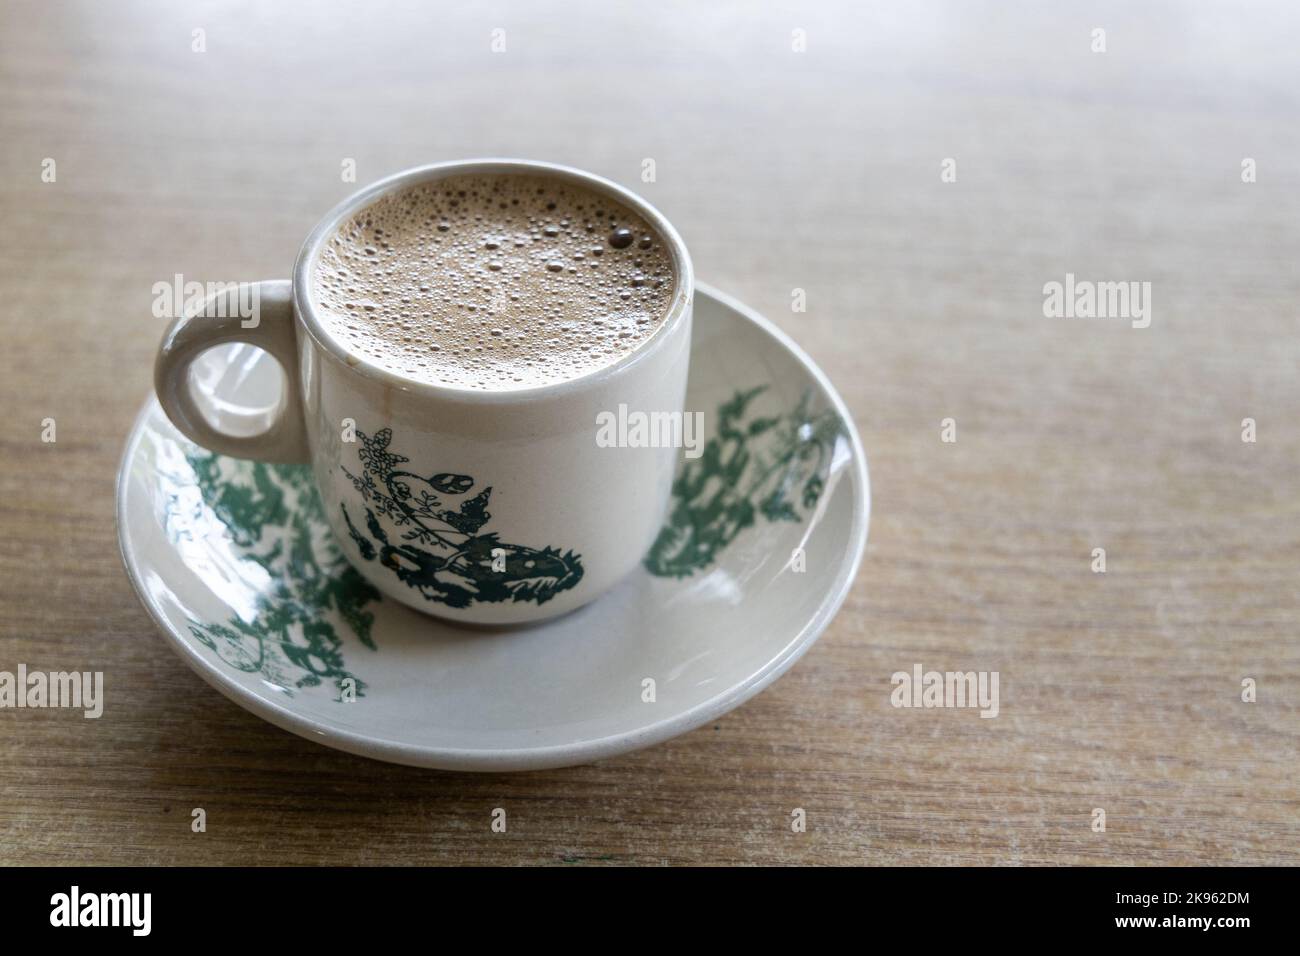 Tradiitional aromatic coffee served in vintage kopitiam cup and saucer Stock Photo